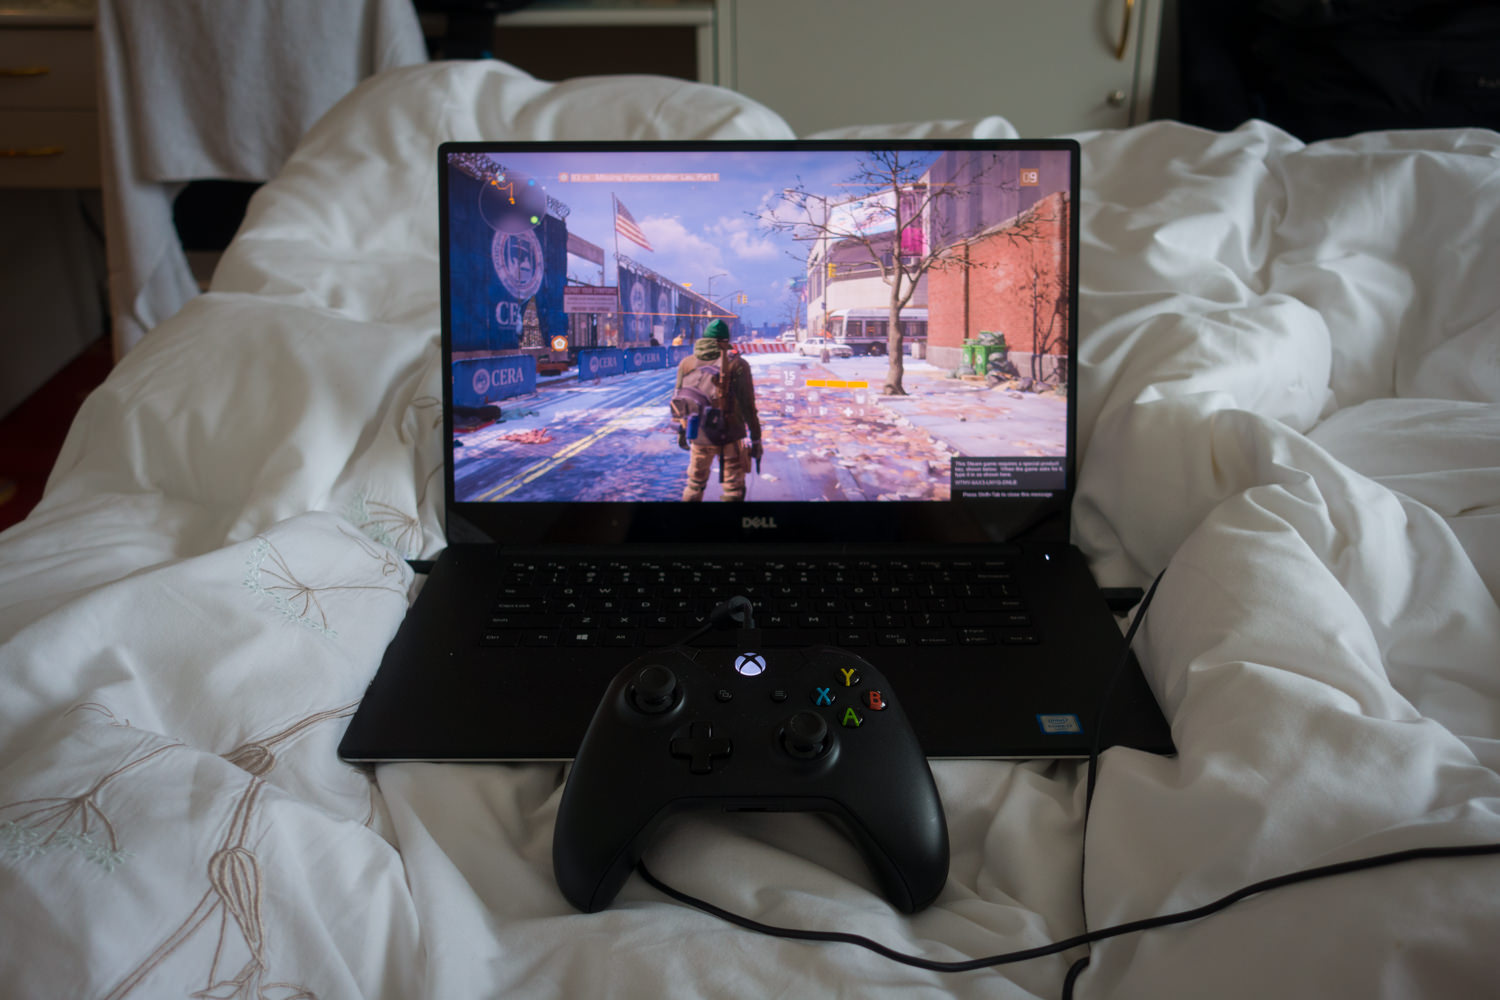 Playing "The Division" on the Dell XPS 15 in my hotel room in Iceland during a stormy day